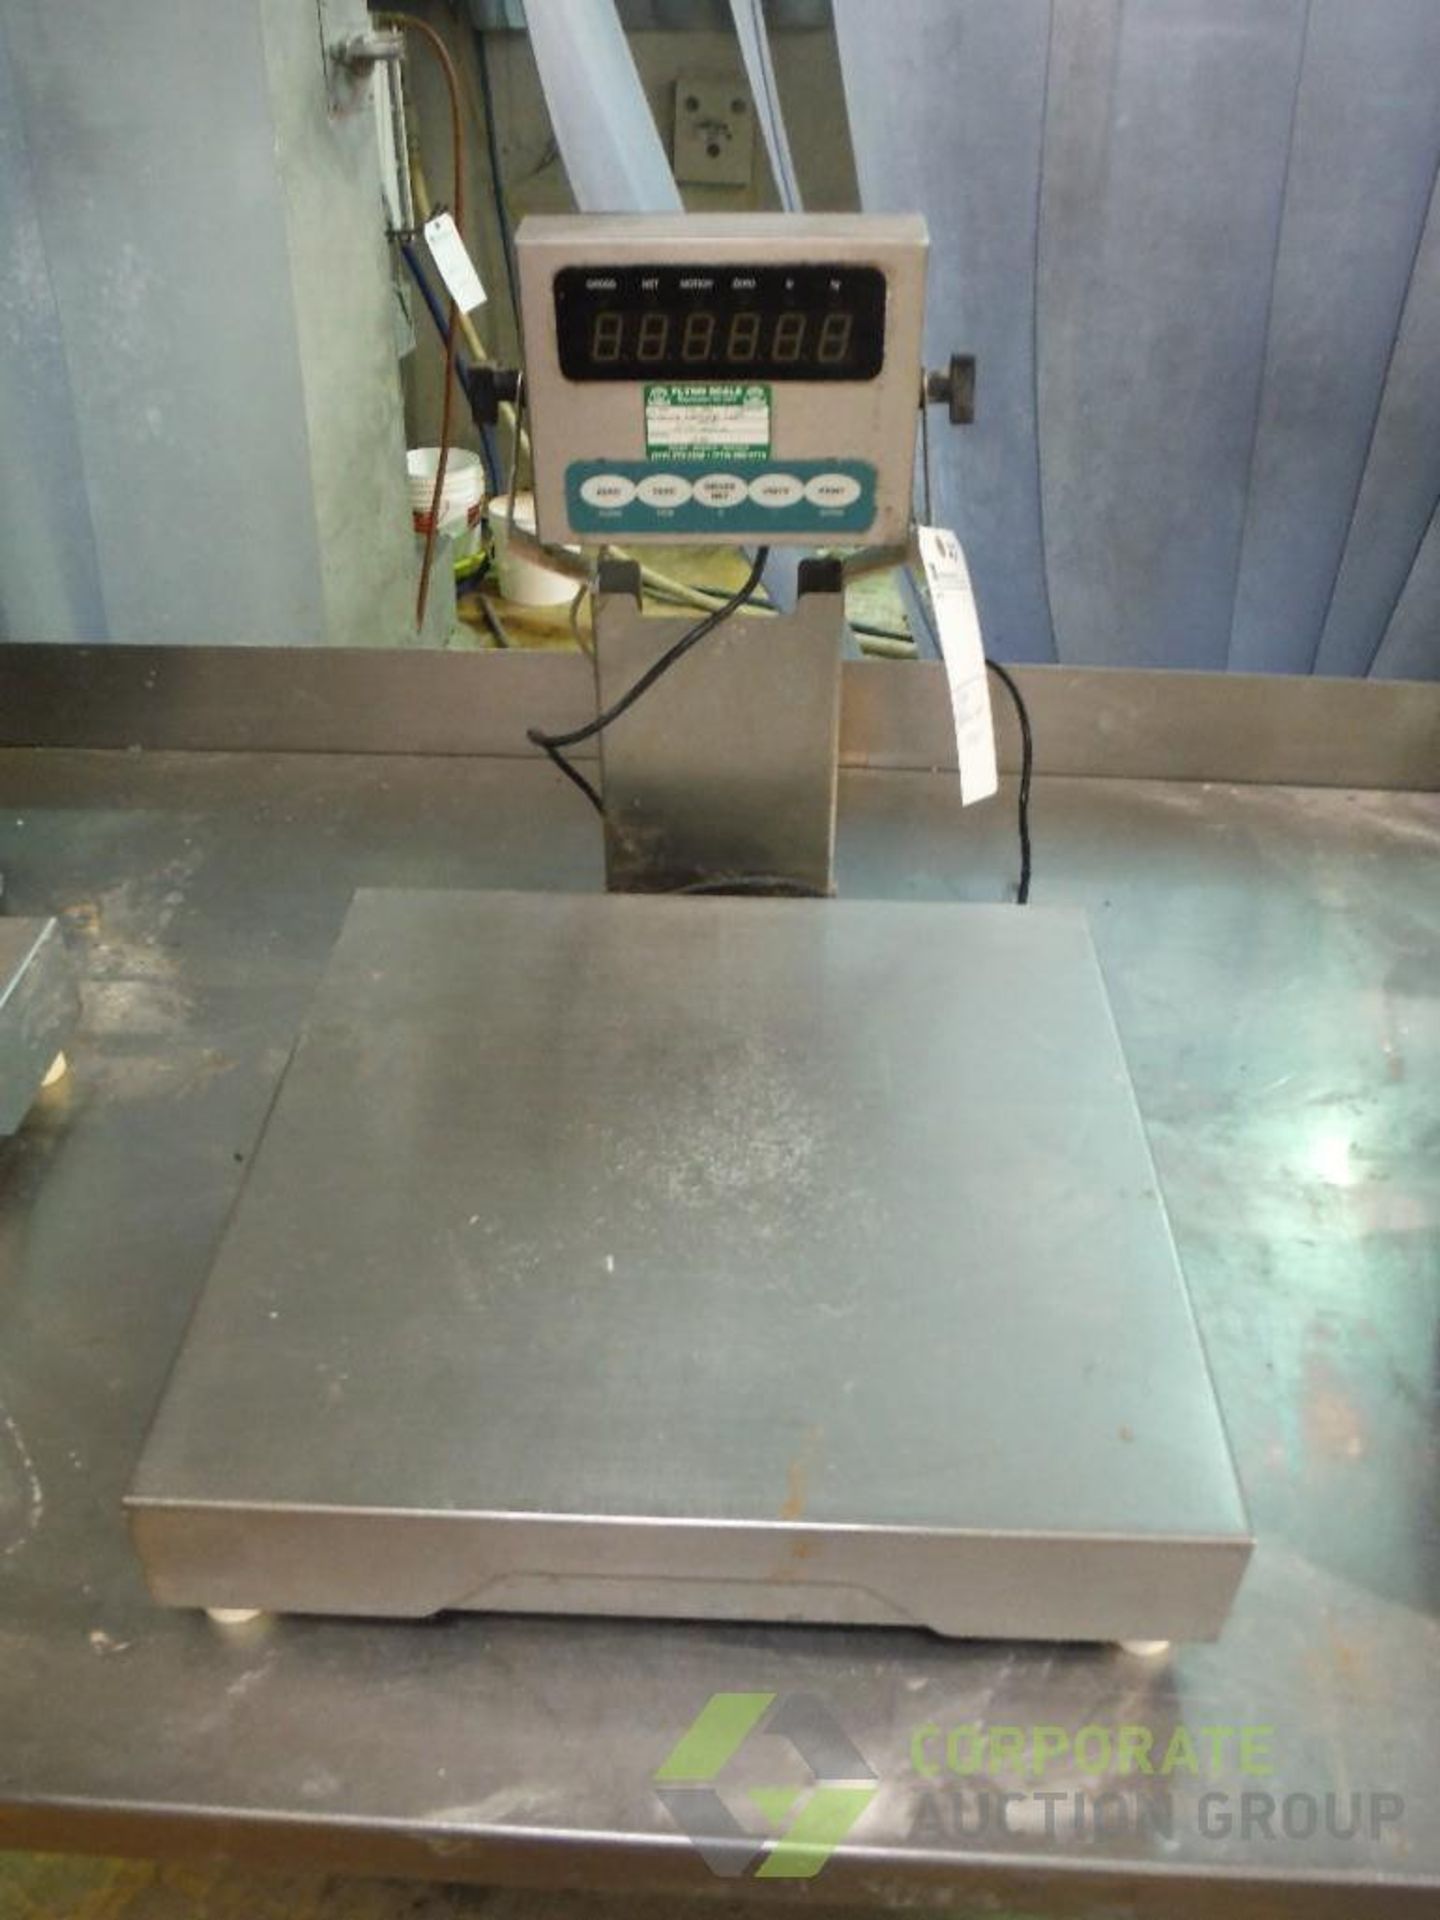 IDS table top scale, Model 410, SN 412510 VER 12 C, capacity 150 x 0.5 lbs., 18 in. x 18 in.